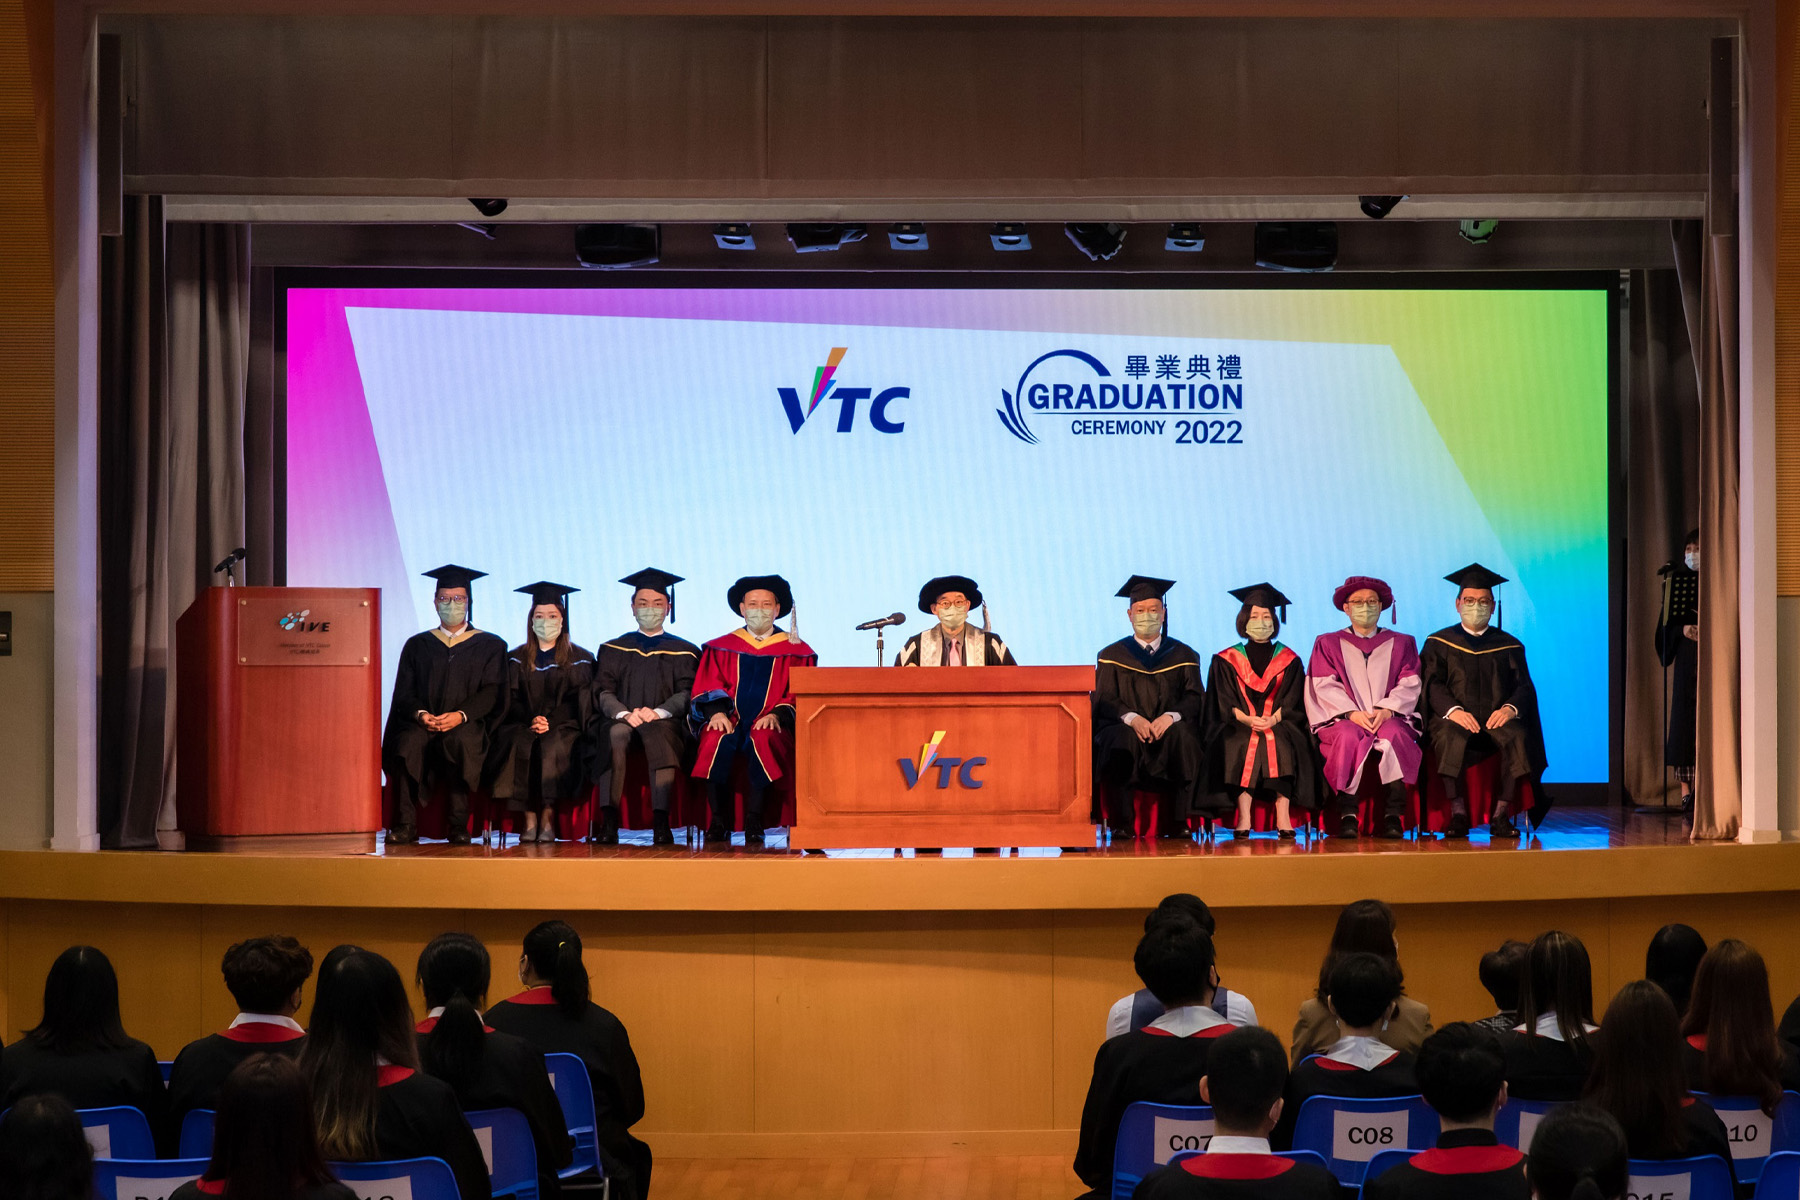 This year, over 16,000 graduates from different VTC member institutions are being conferred with awards ranging from Bachelor Degree to Higher Diploma, Diploma of Foundation Studies, Diploma of Vocational Education, Diploma and Certificate